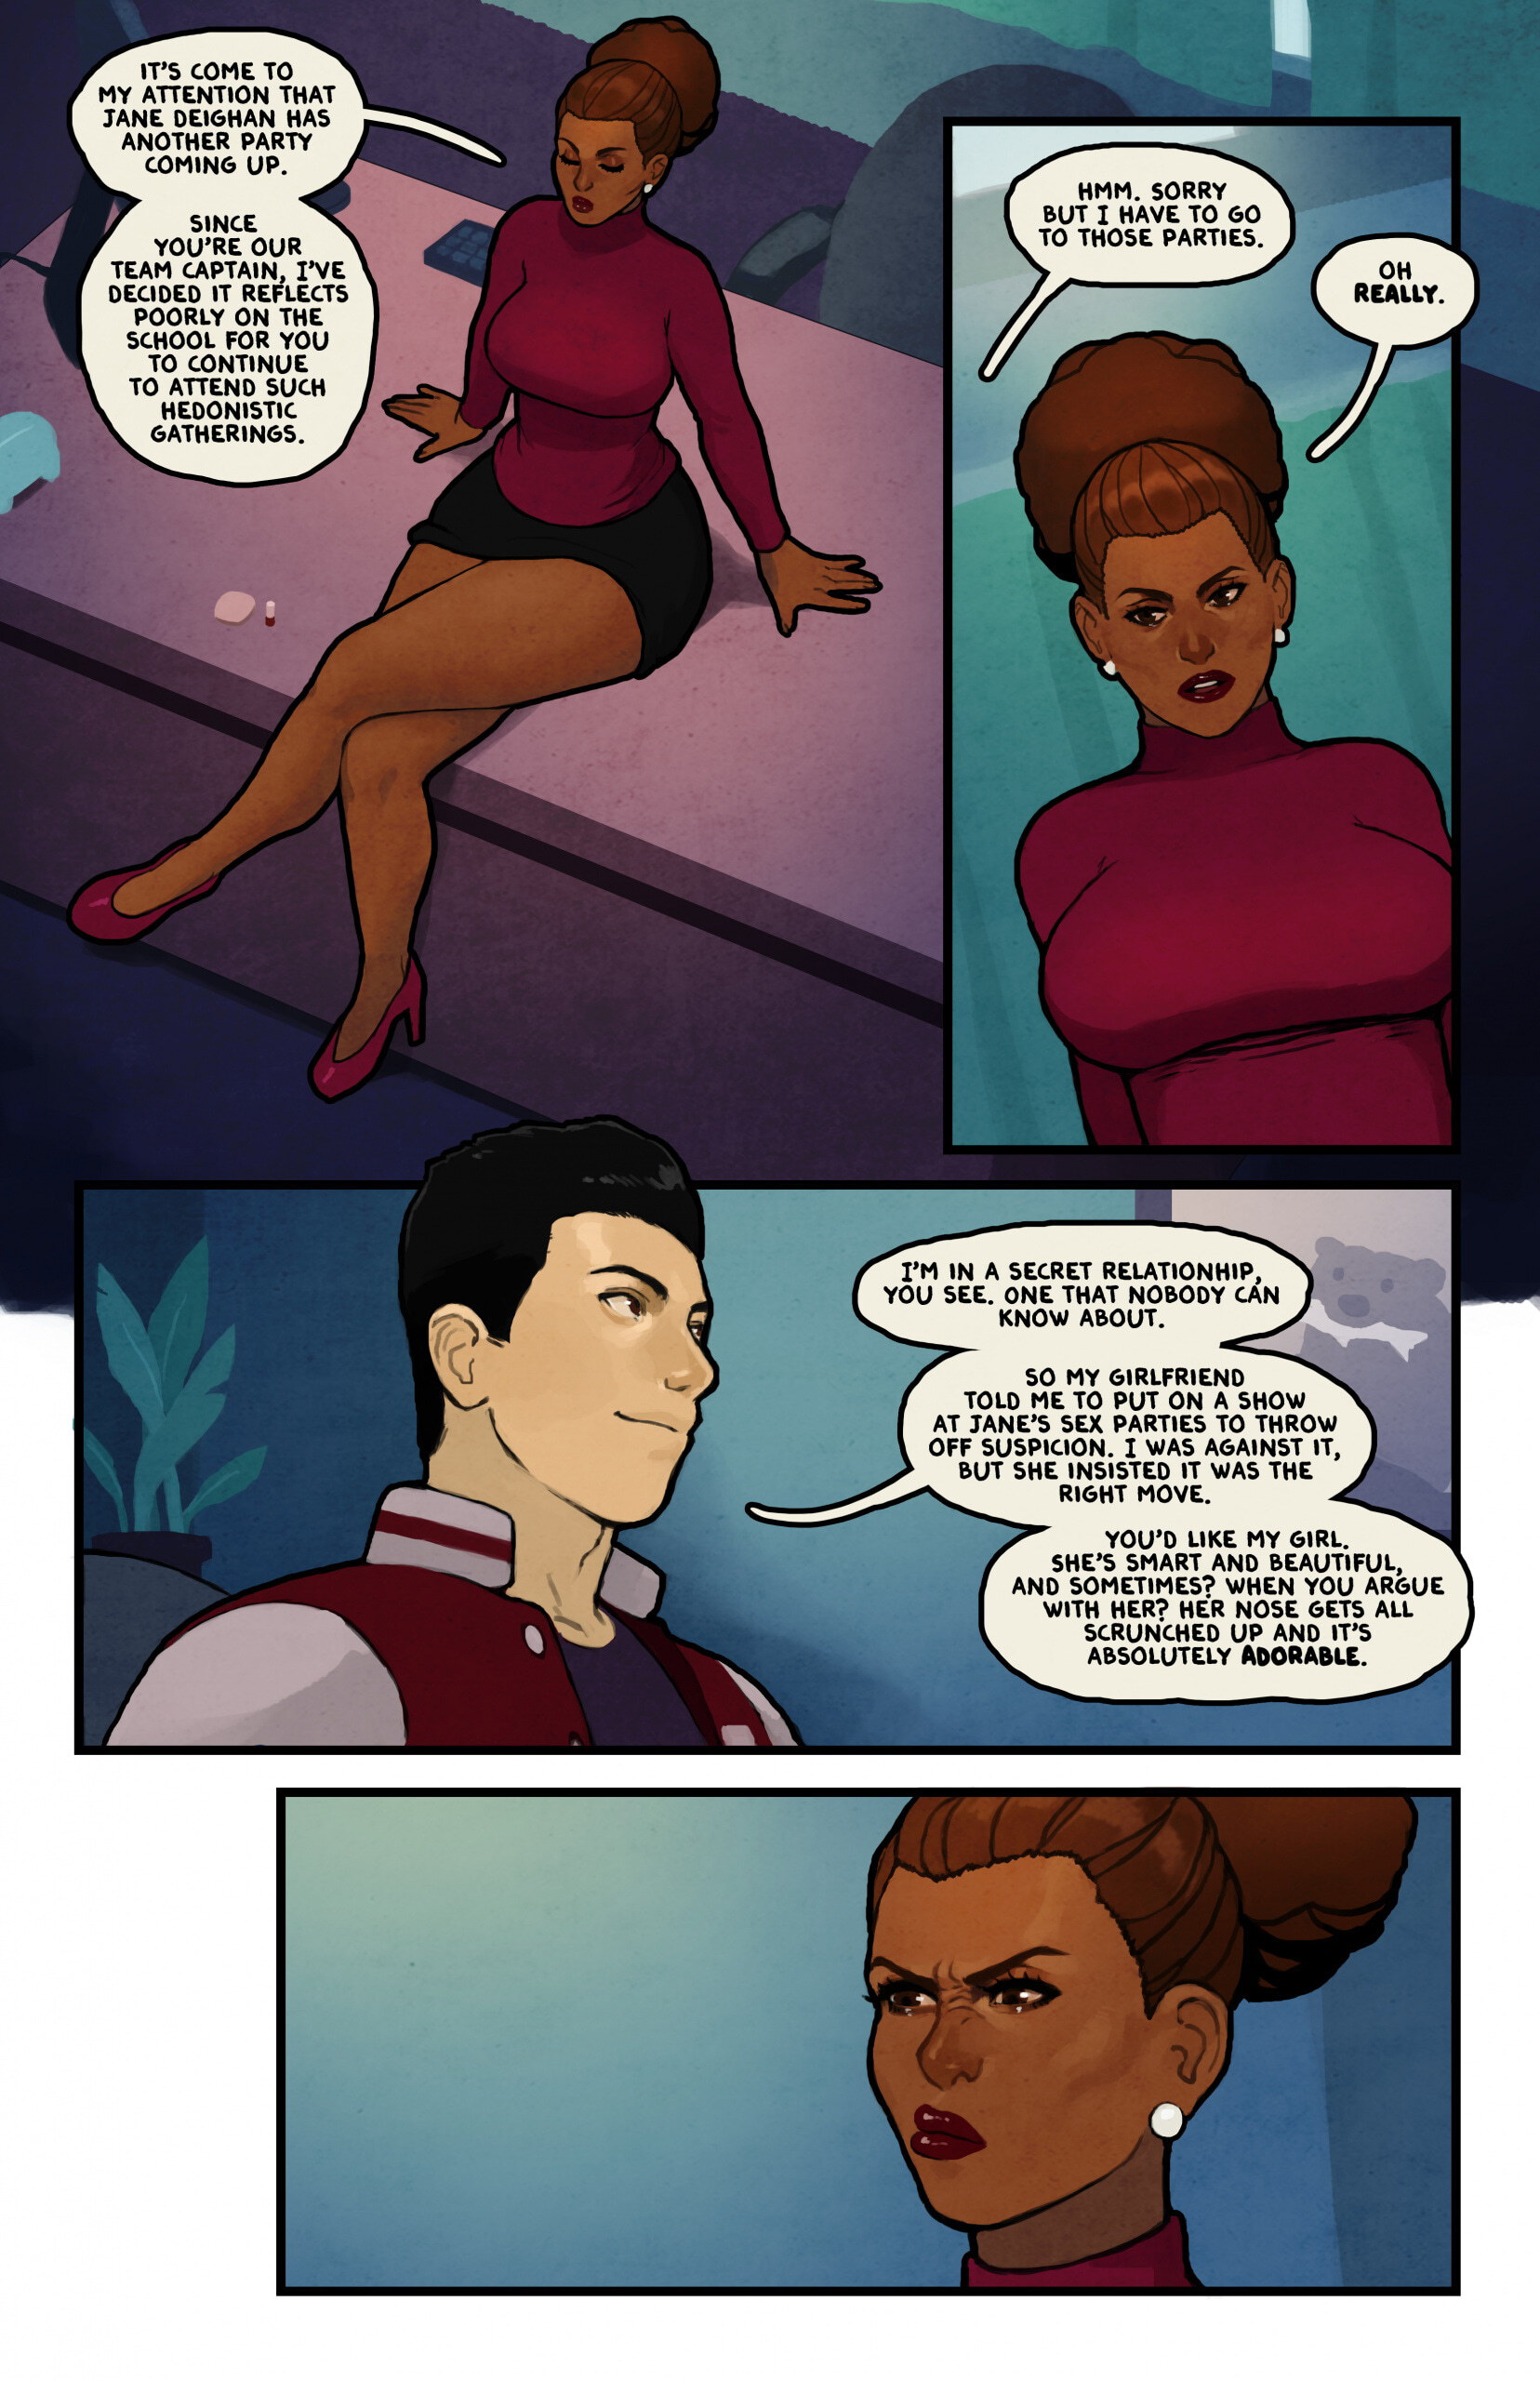 This Romantic World - Page 188